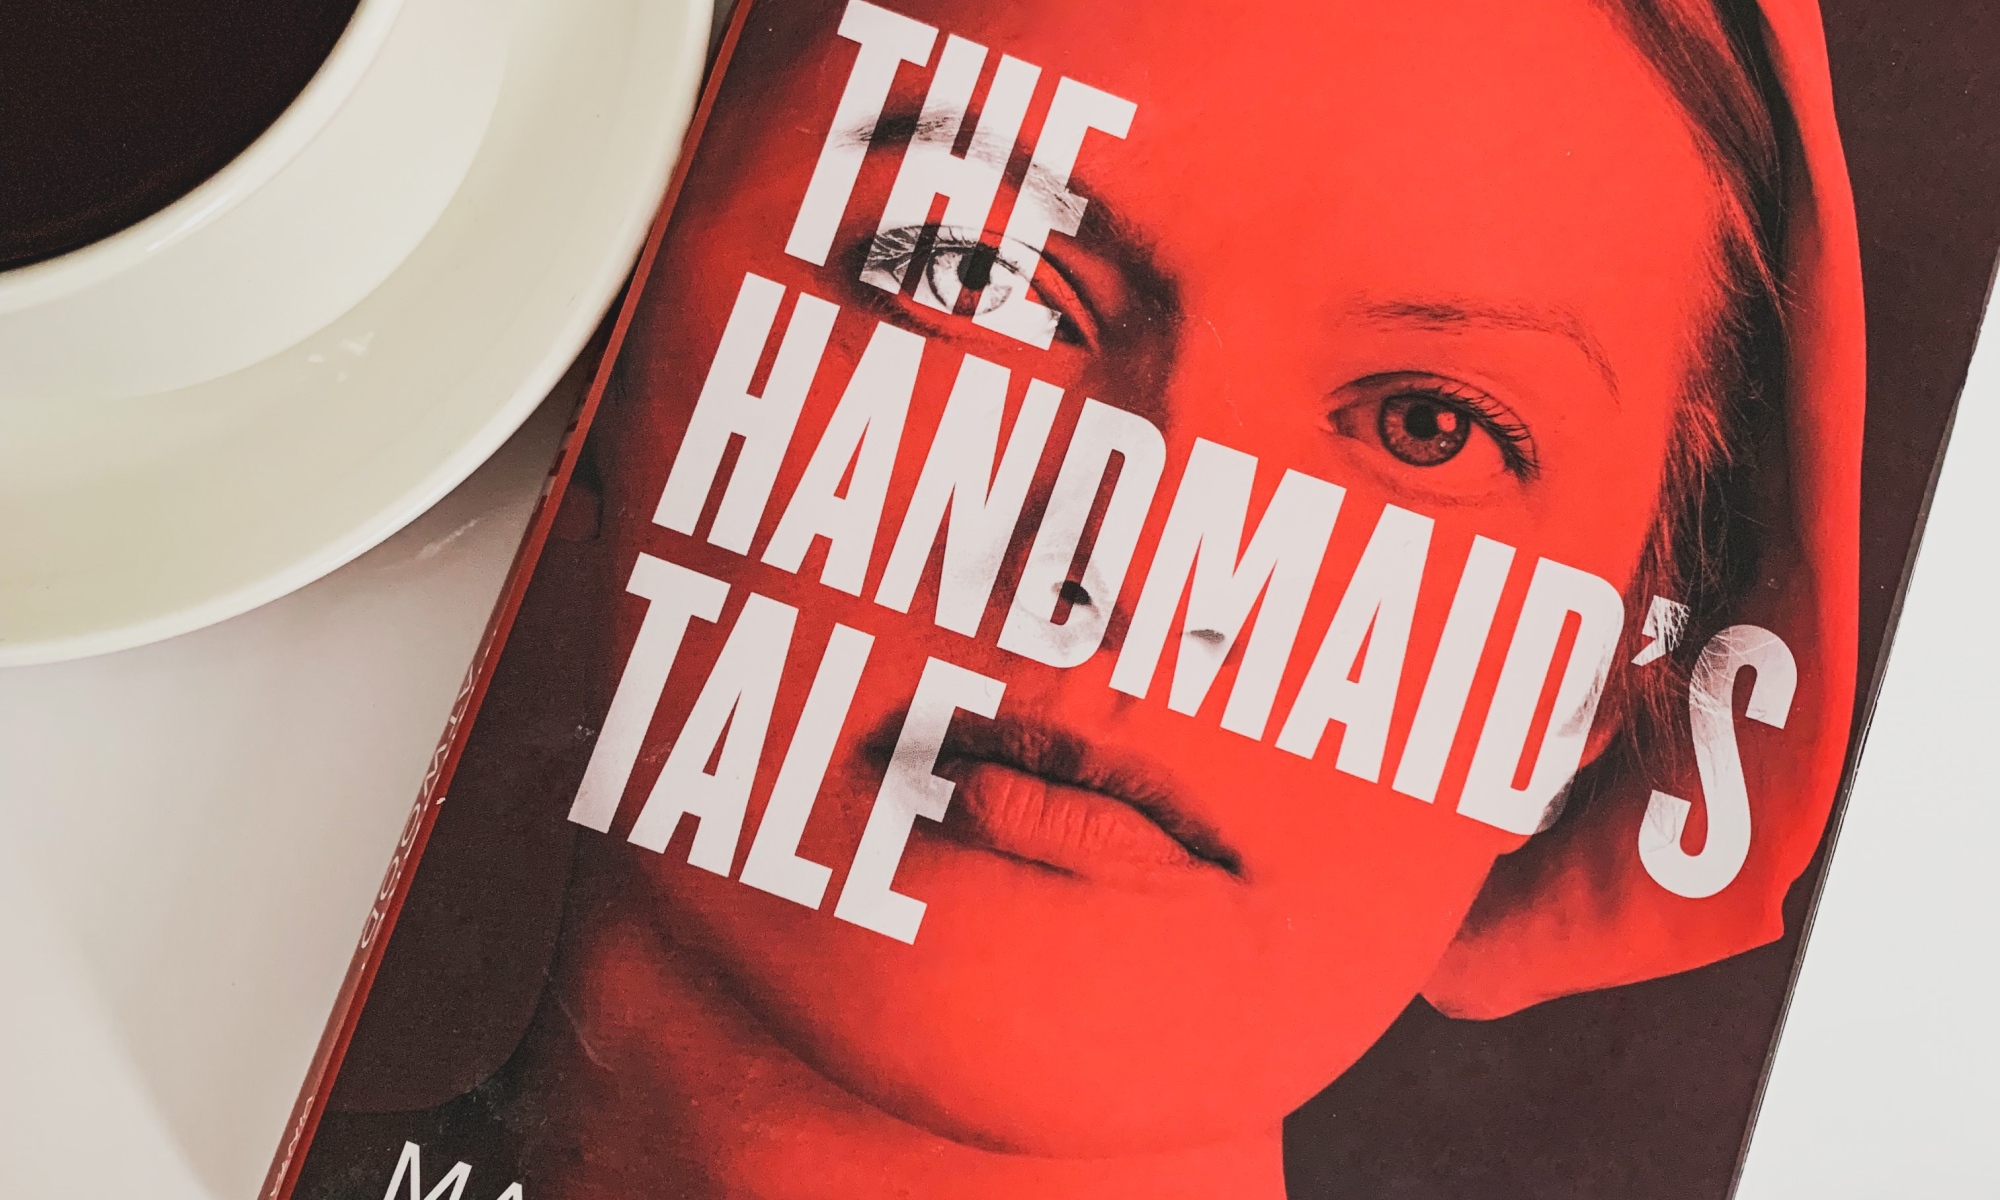 handmaid's tale book review new york times